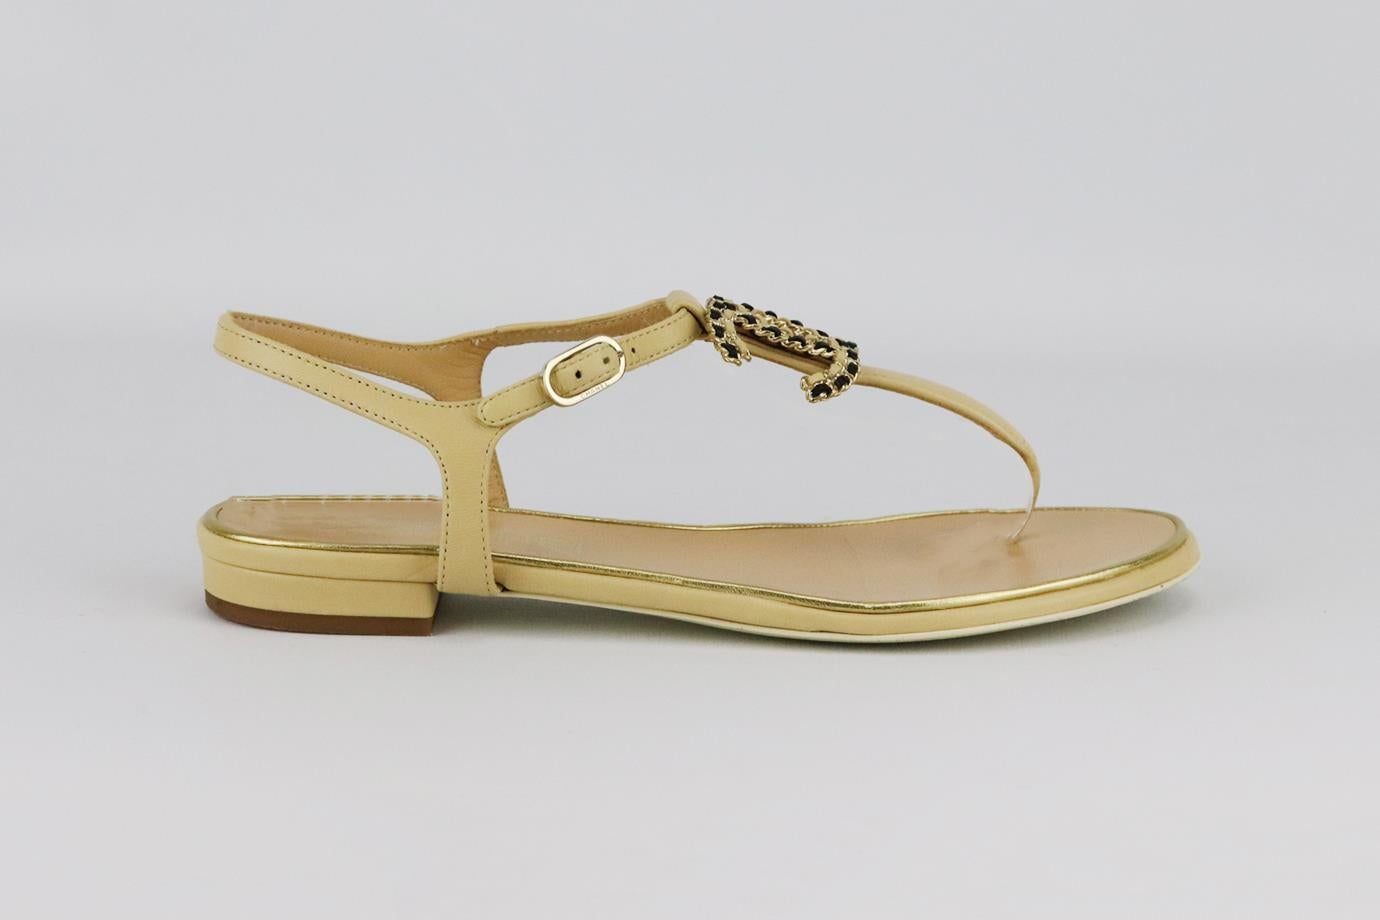 Chanel 2014 CC chain detailed leather sandals. Beige, gold and black. Buckle fastening at back. Does not come with box or dustbag. Size: EU 38 (UK 5, US 8). Insole: 9.4 in. Heel: 0.5 in
